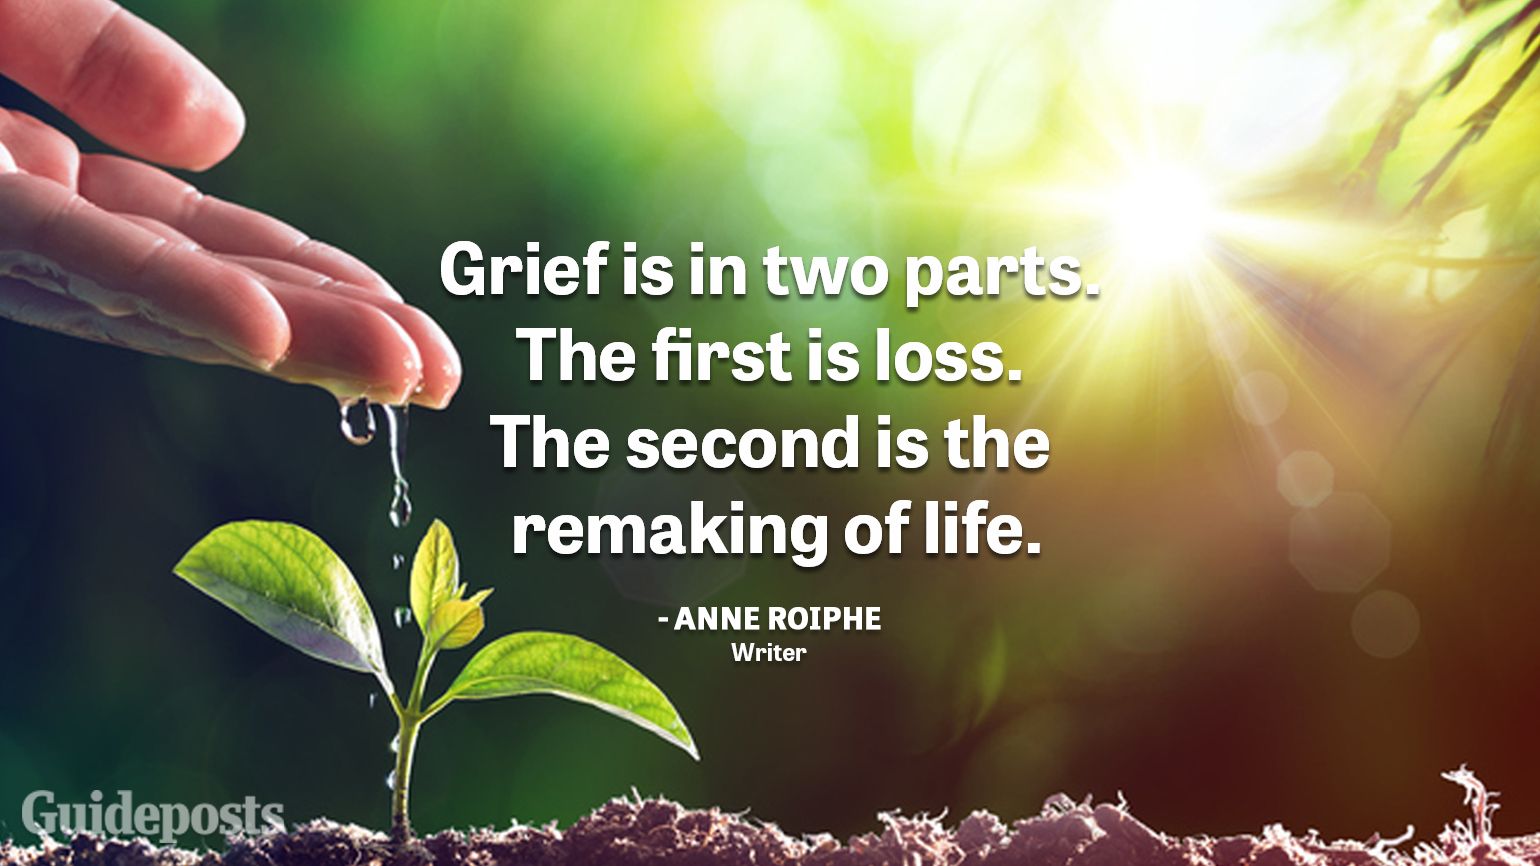 Uplifting Quotes to Cope with Grief "Grief is in two parts. The first is loss. The second is the remaking of life." — Anne Roiphe, Writer better living life advice